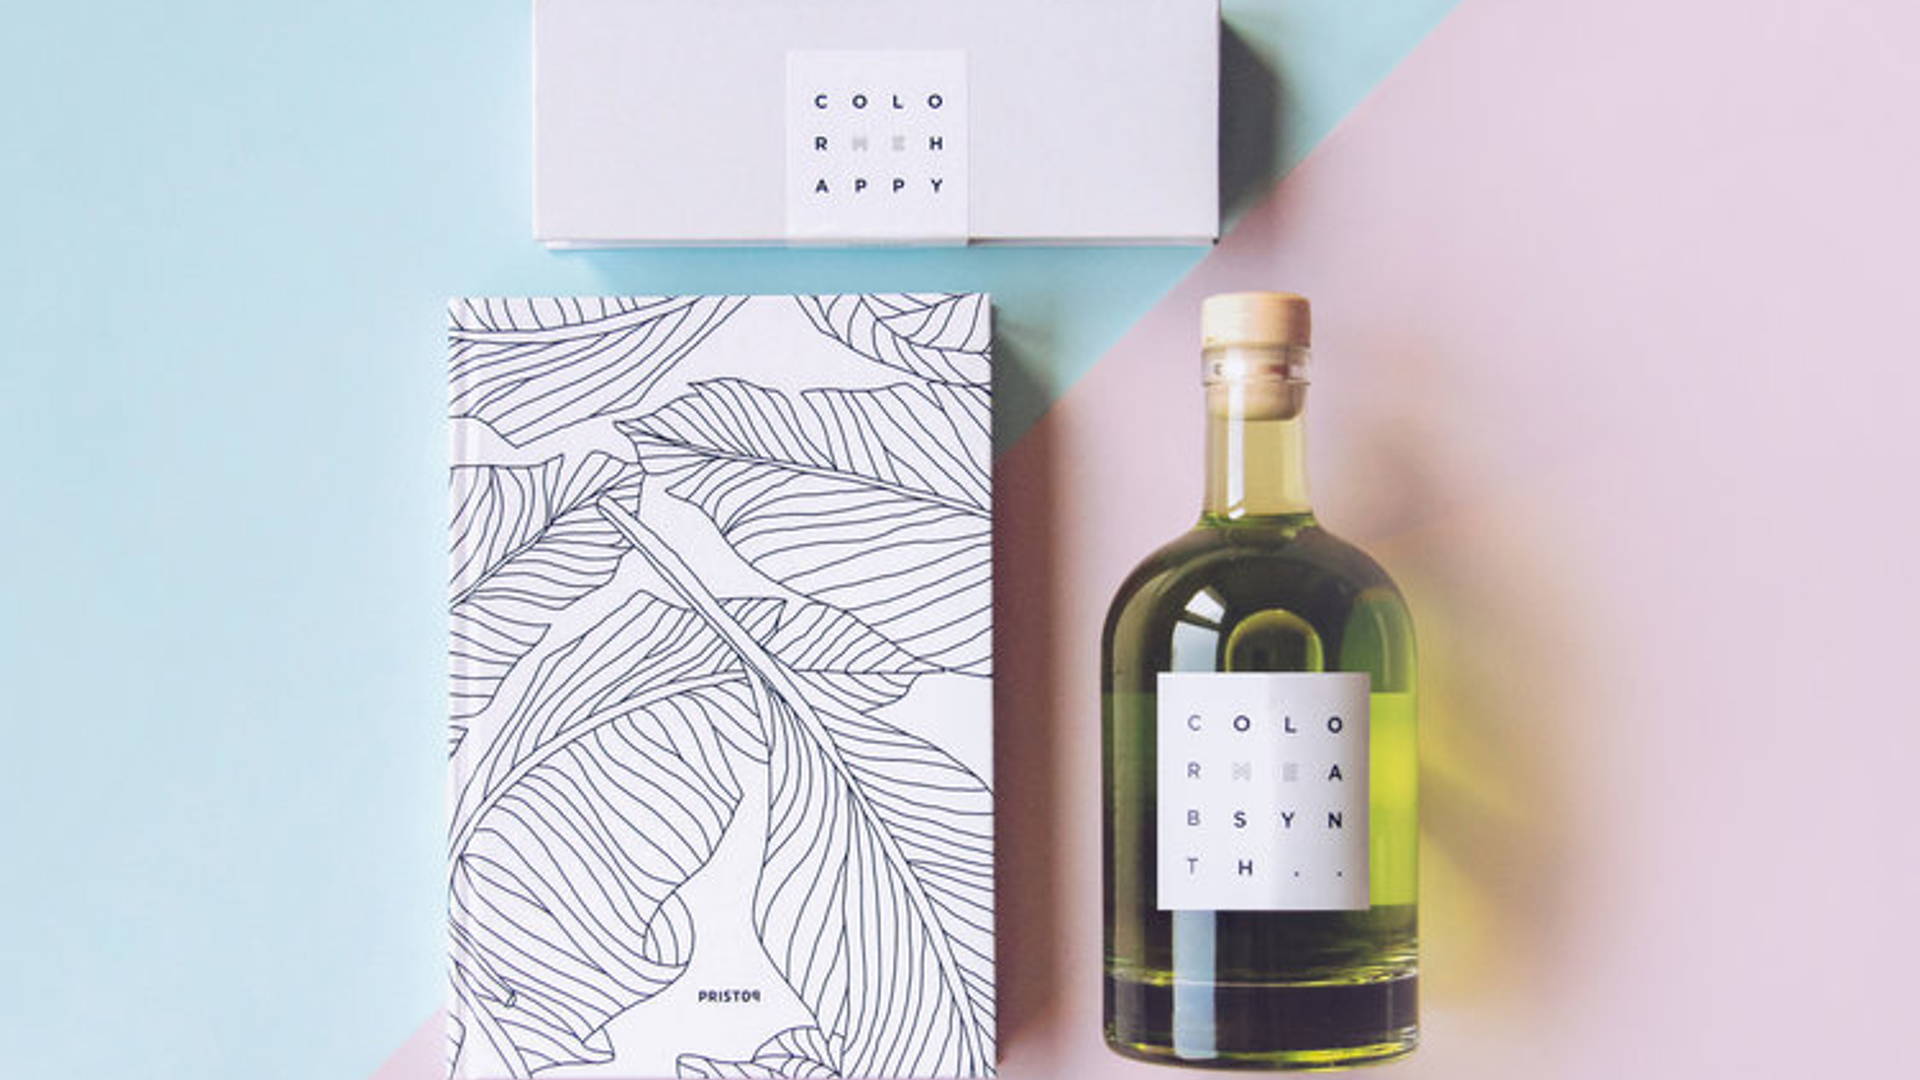 Featured image for Bespoke Notebooks and Bottles of Absinthe Make the Best Client Gifts